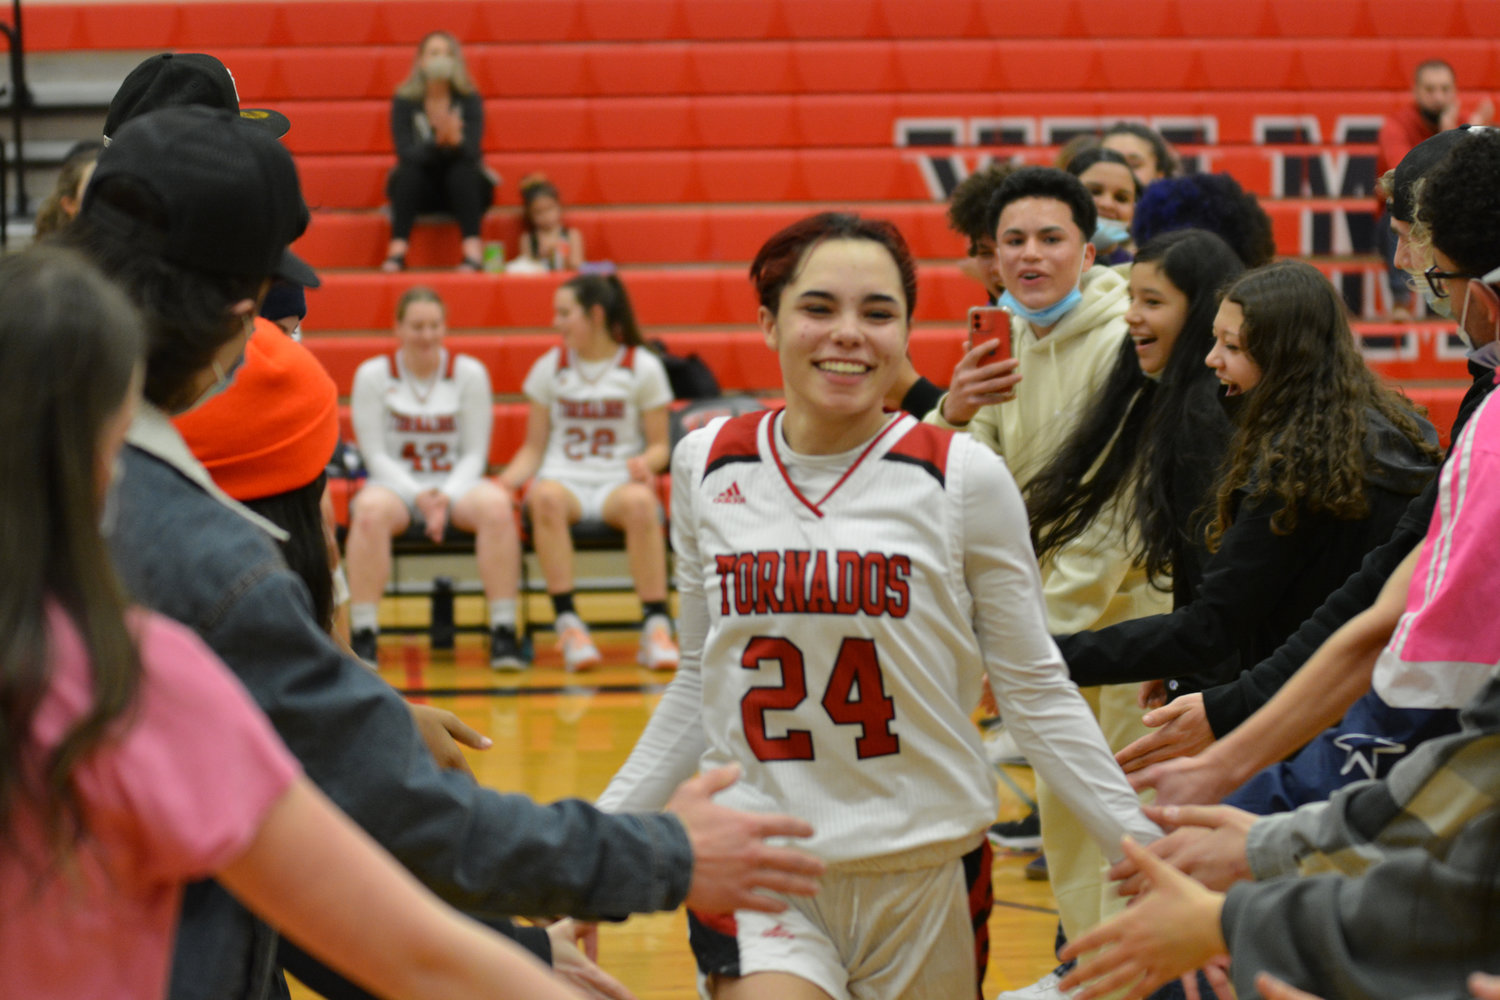 Alexia Zumek makes her entrance at a game against Mount Tahoma on Feb. 11.